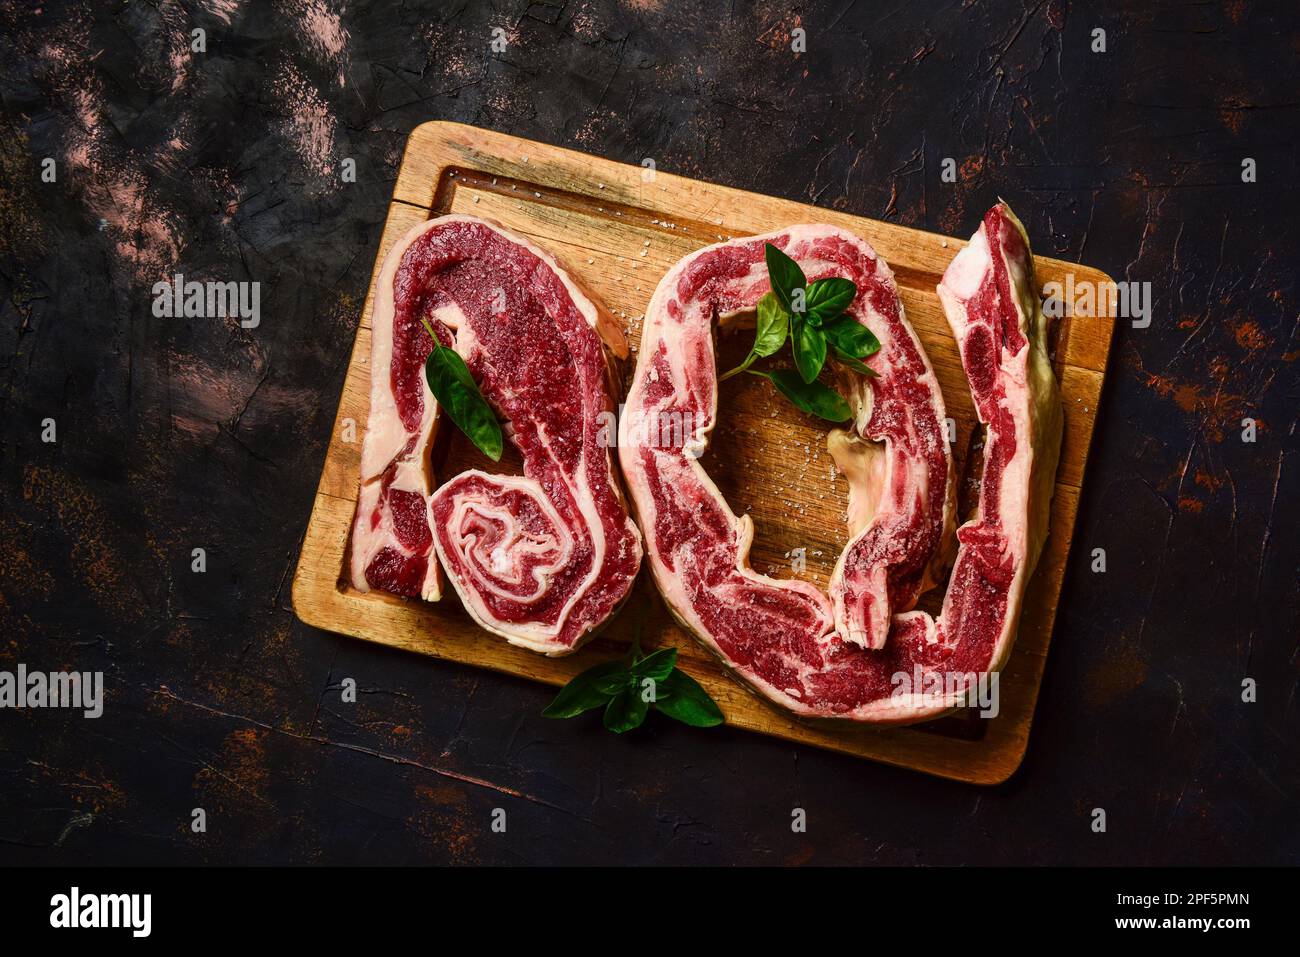 Cow beef ribs Prepared on the table Stock Photo